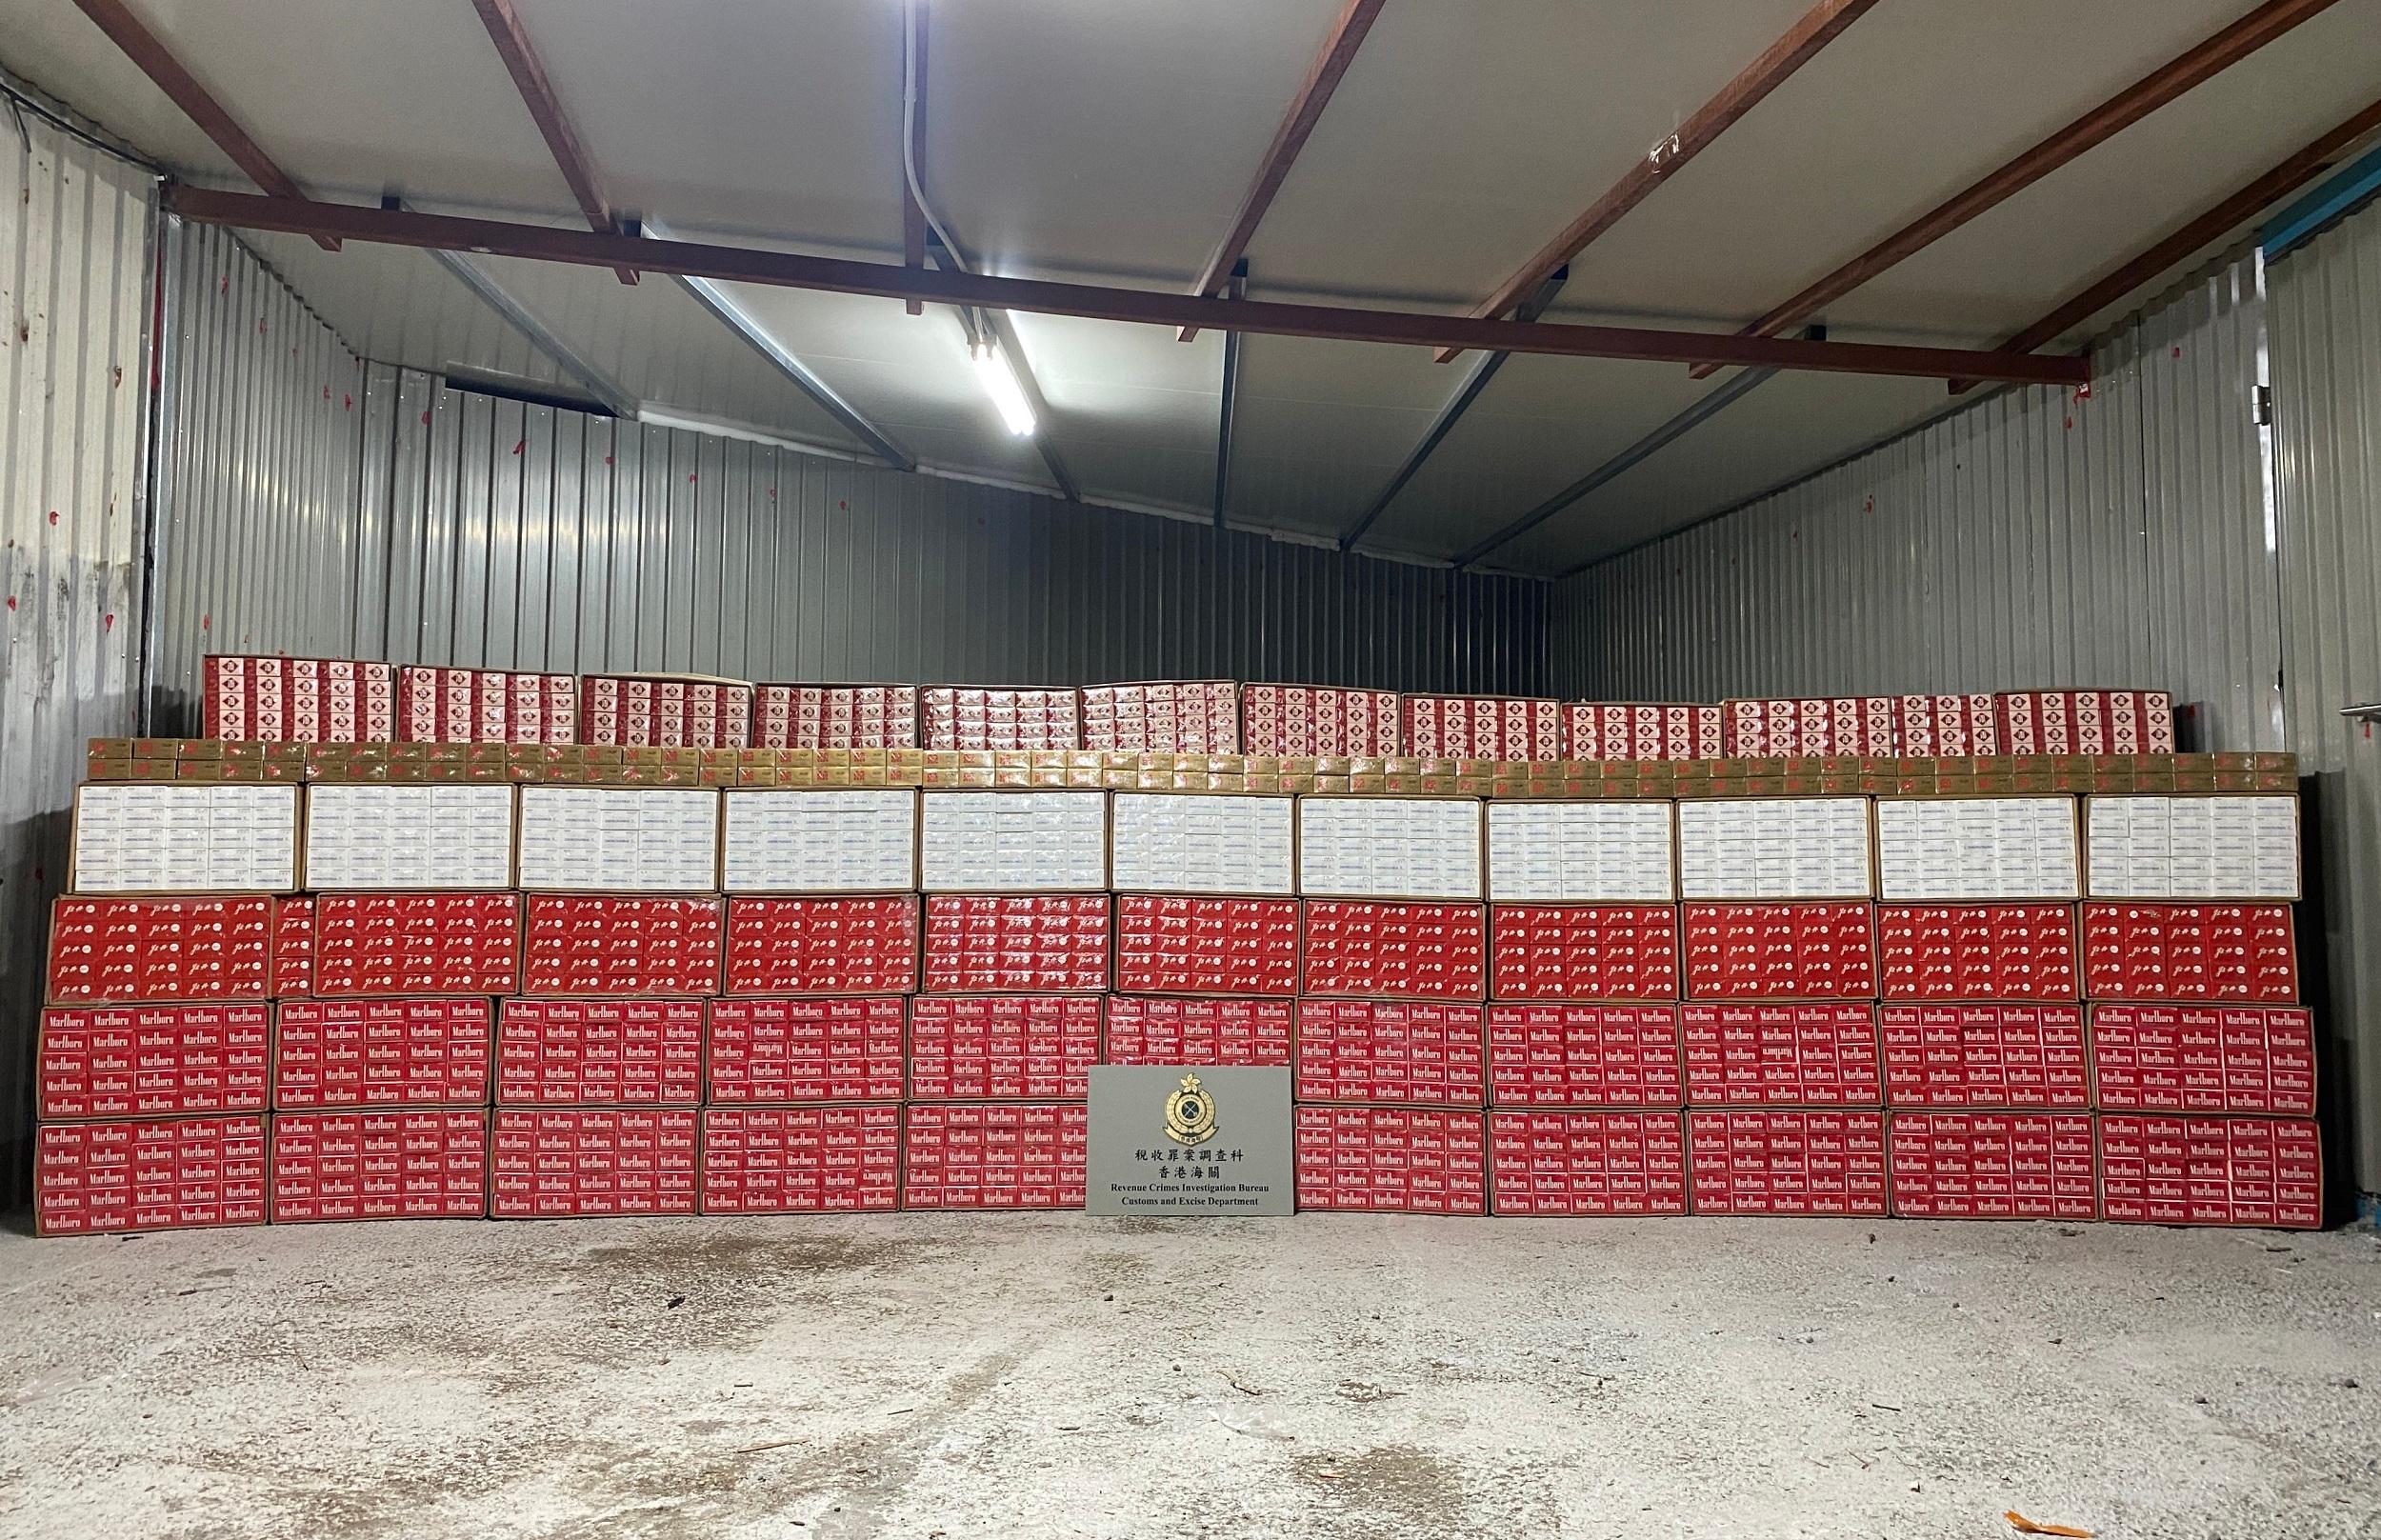 Hong Kong Customs yesterday (August 16) raided a suspected illicit cigarette storage centre in Yuen Long and seized about 2.82 million suspected illicit cigarettes with an estimated market value of about $7.75 million and a duty potential of about $5.37 million. Photo shows some of the suspected illicit cigarettes seized.